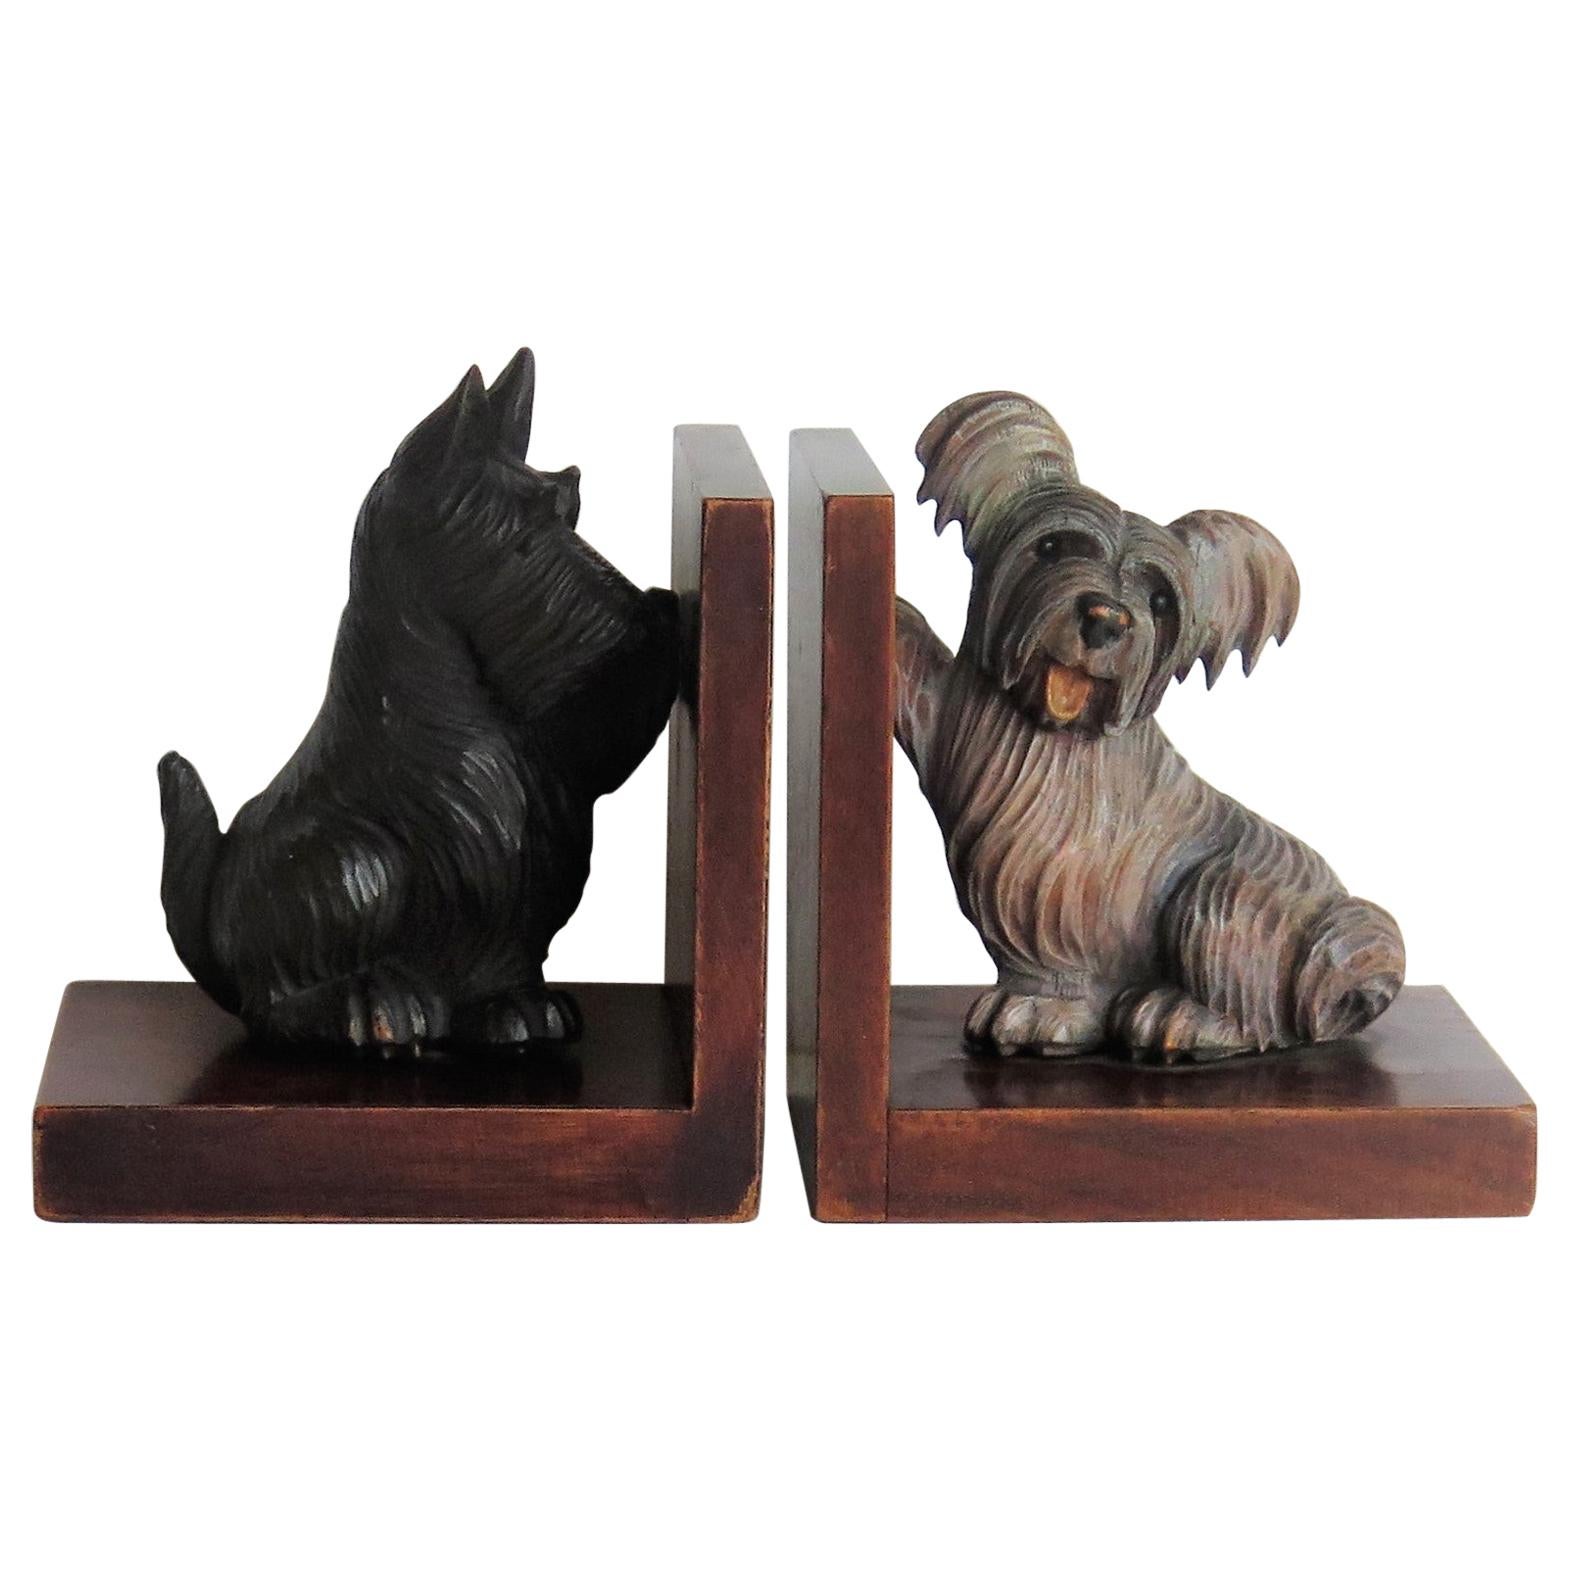 Art Deco Pair of Bookends Hardwood with Terrier Dog Figures, circa 1930